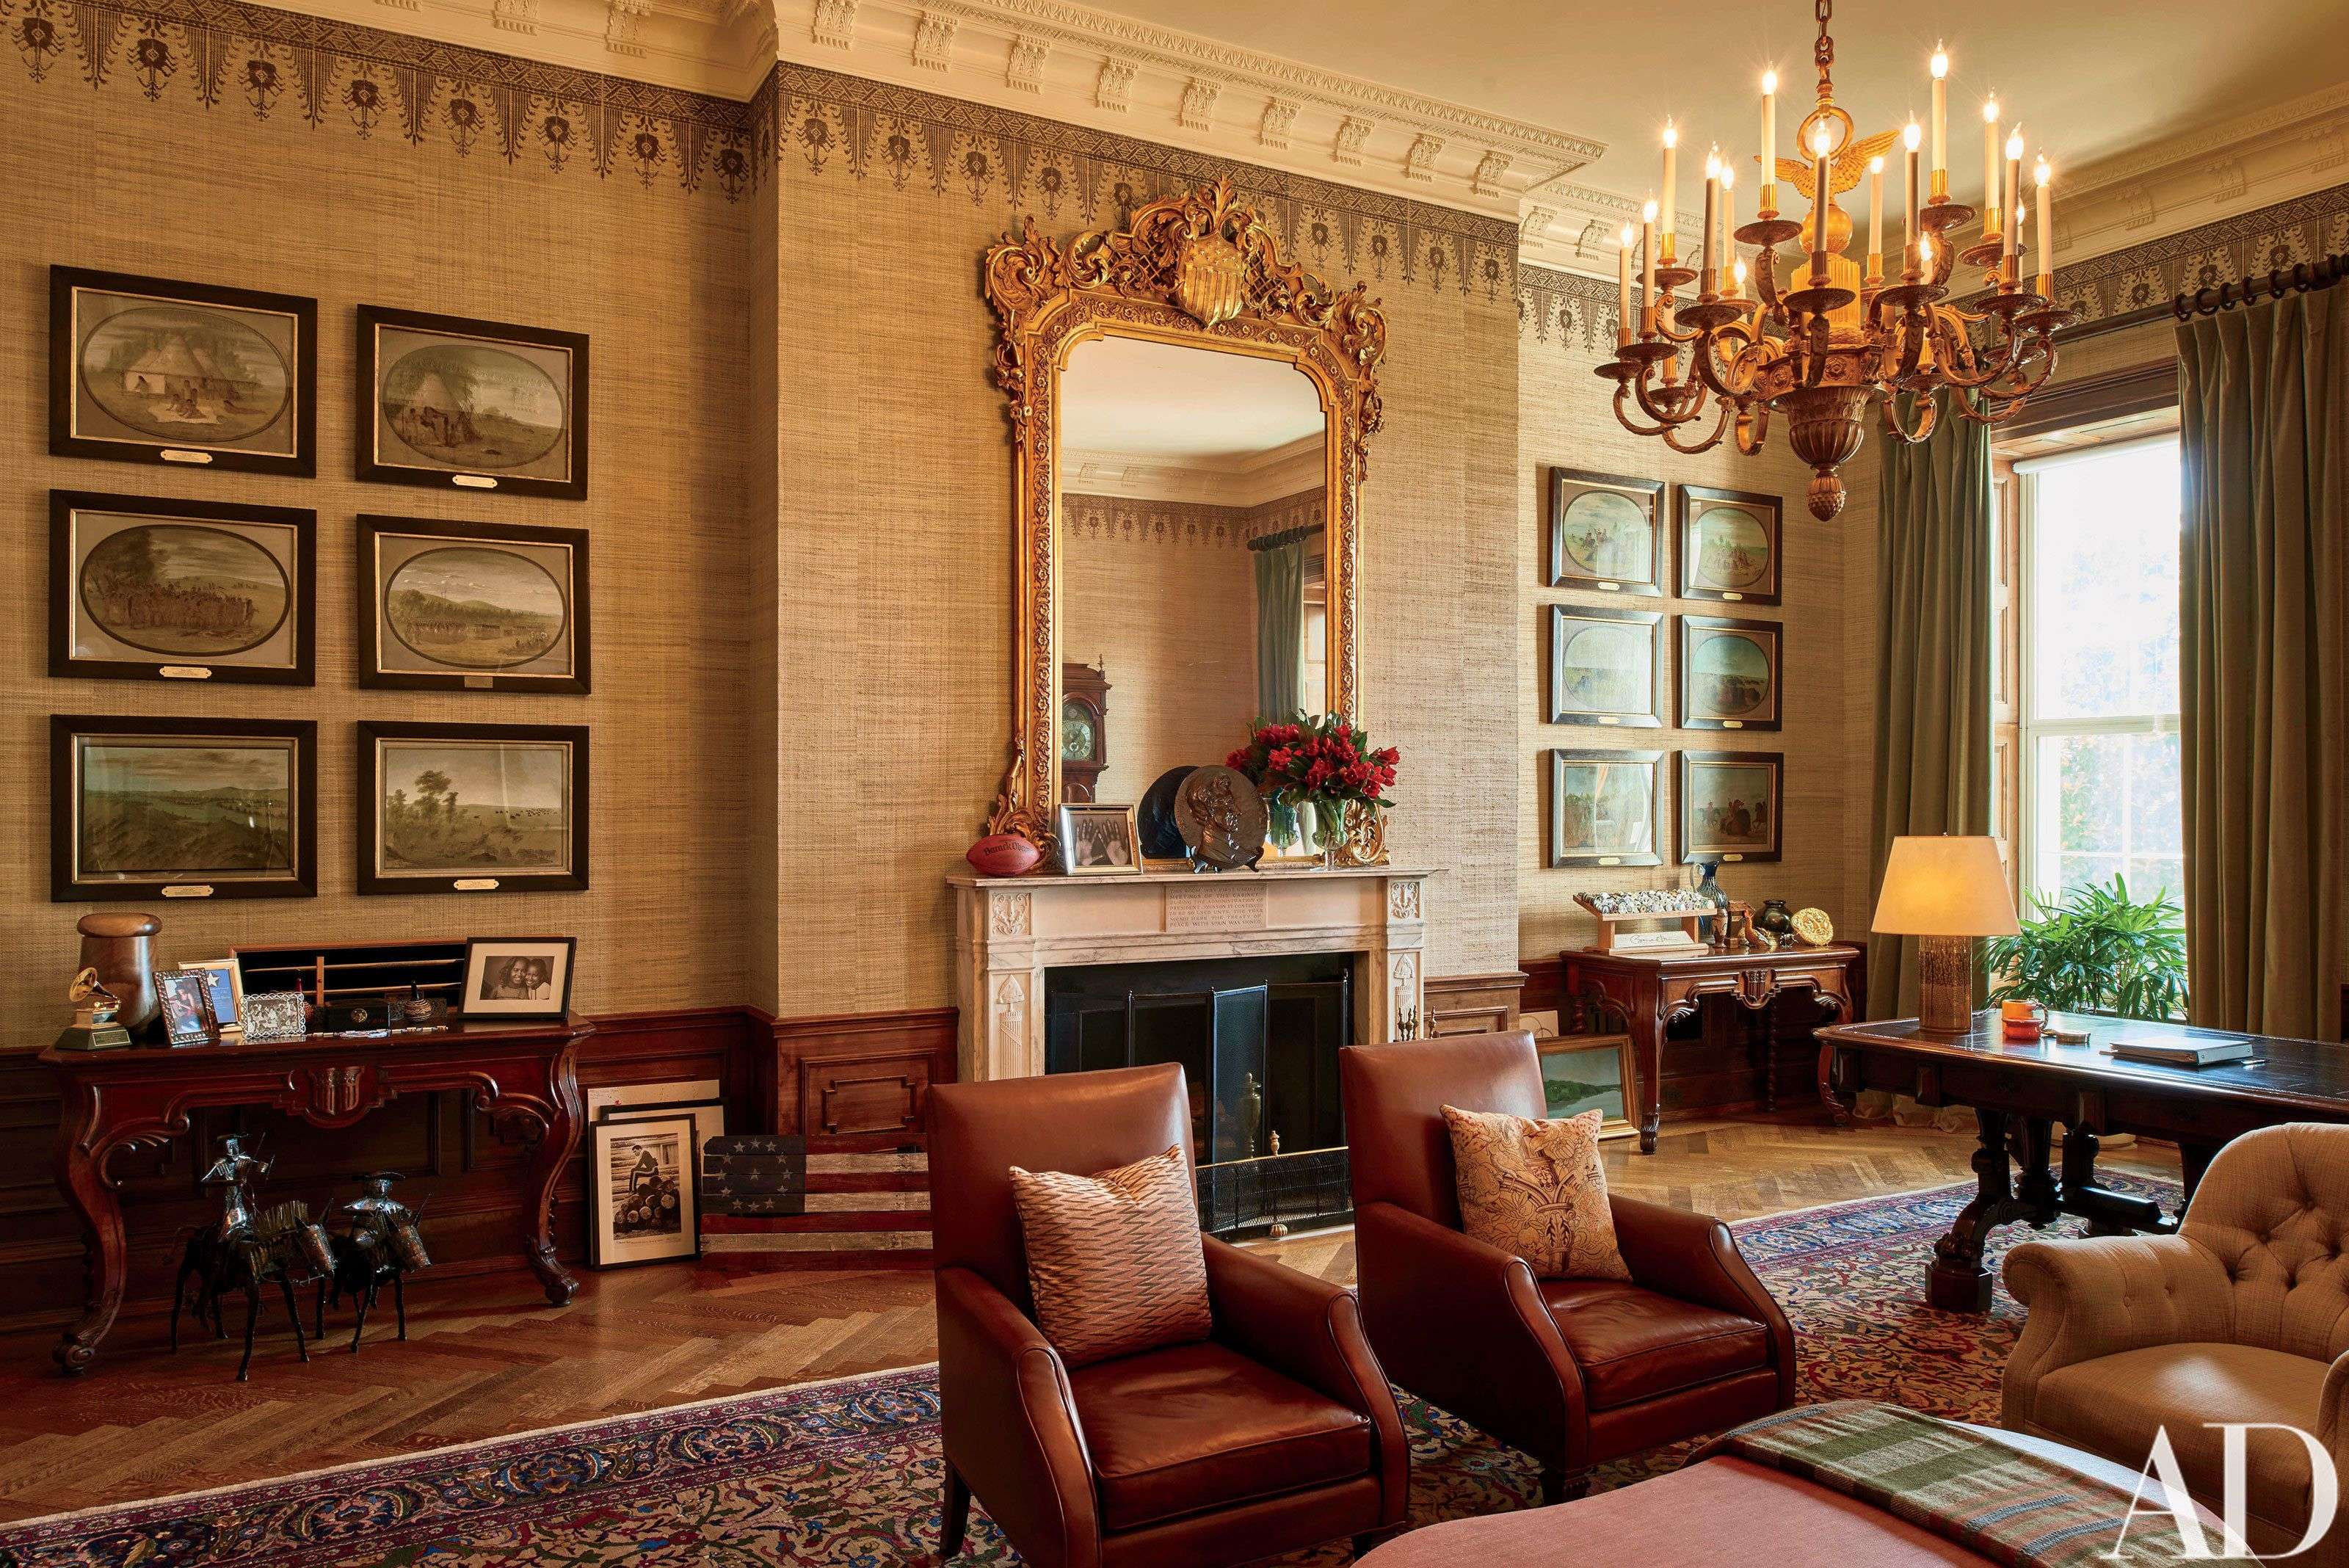 This image provided by Architectural Digest shows The Treaty Room in the White House in Washington. The Treaty Room is filled with memorabilia including one of President Barack Obama's two Grammy Awards, family photos, and a personalized football. It's also where Obama often retreats late at night. He uses the room's namesake table, which has been in the White House since 1869, as a desk. (Michael Mundy/Architectural Digest via AP)